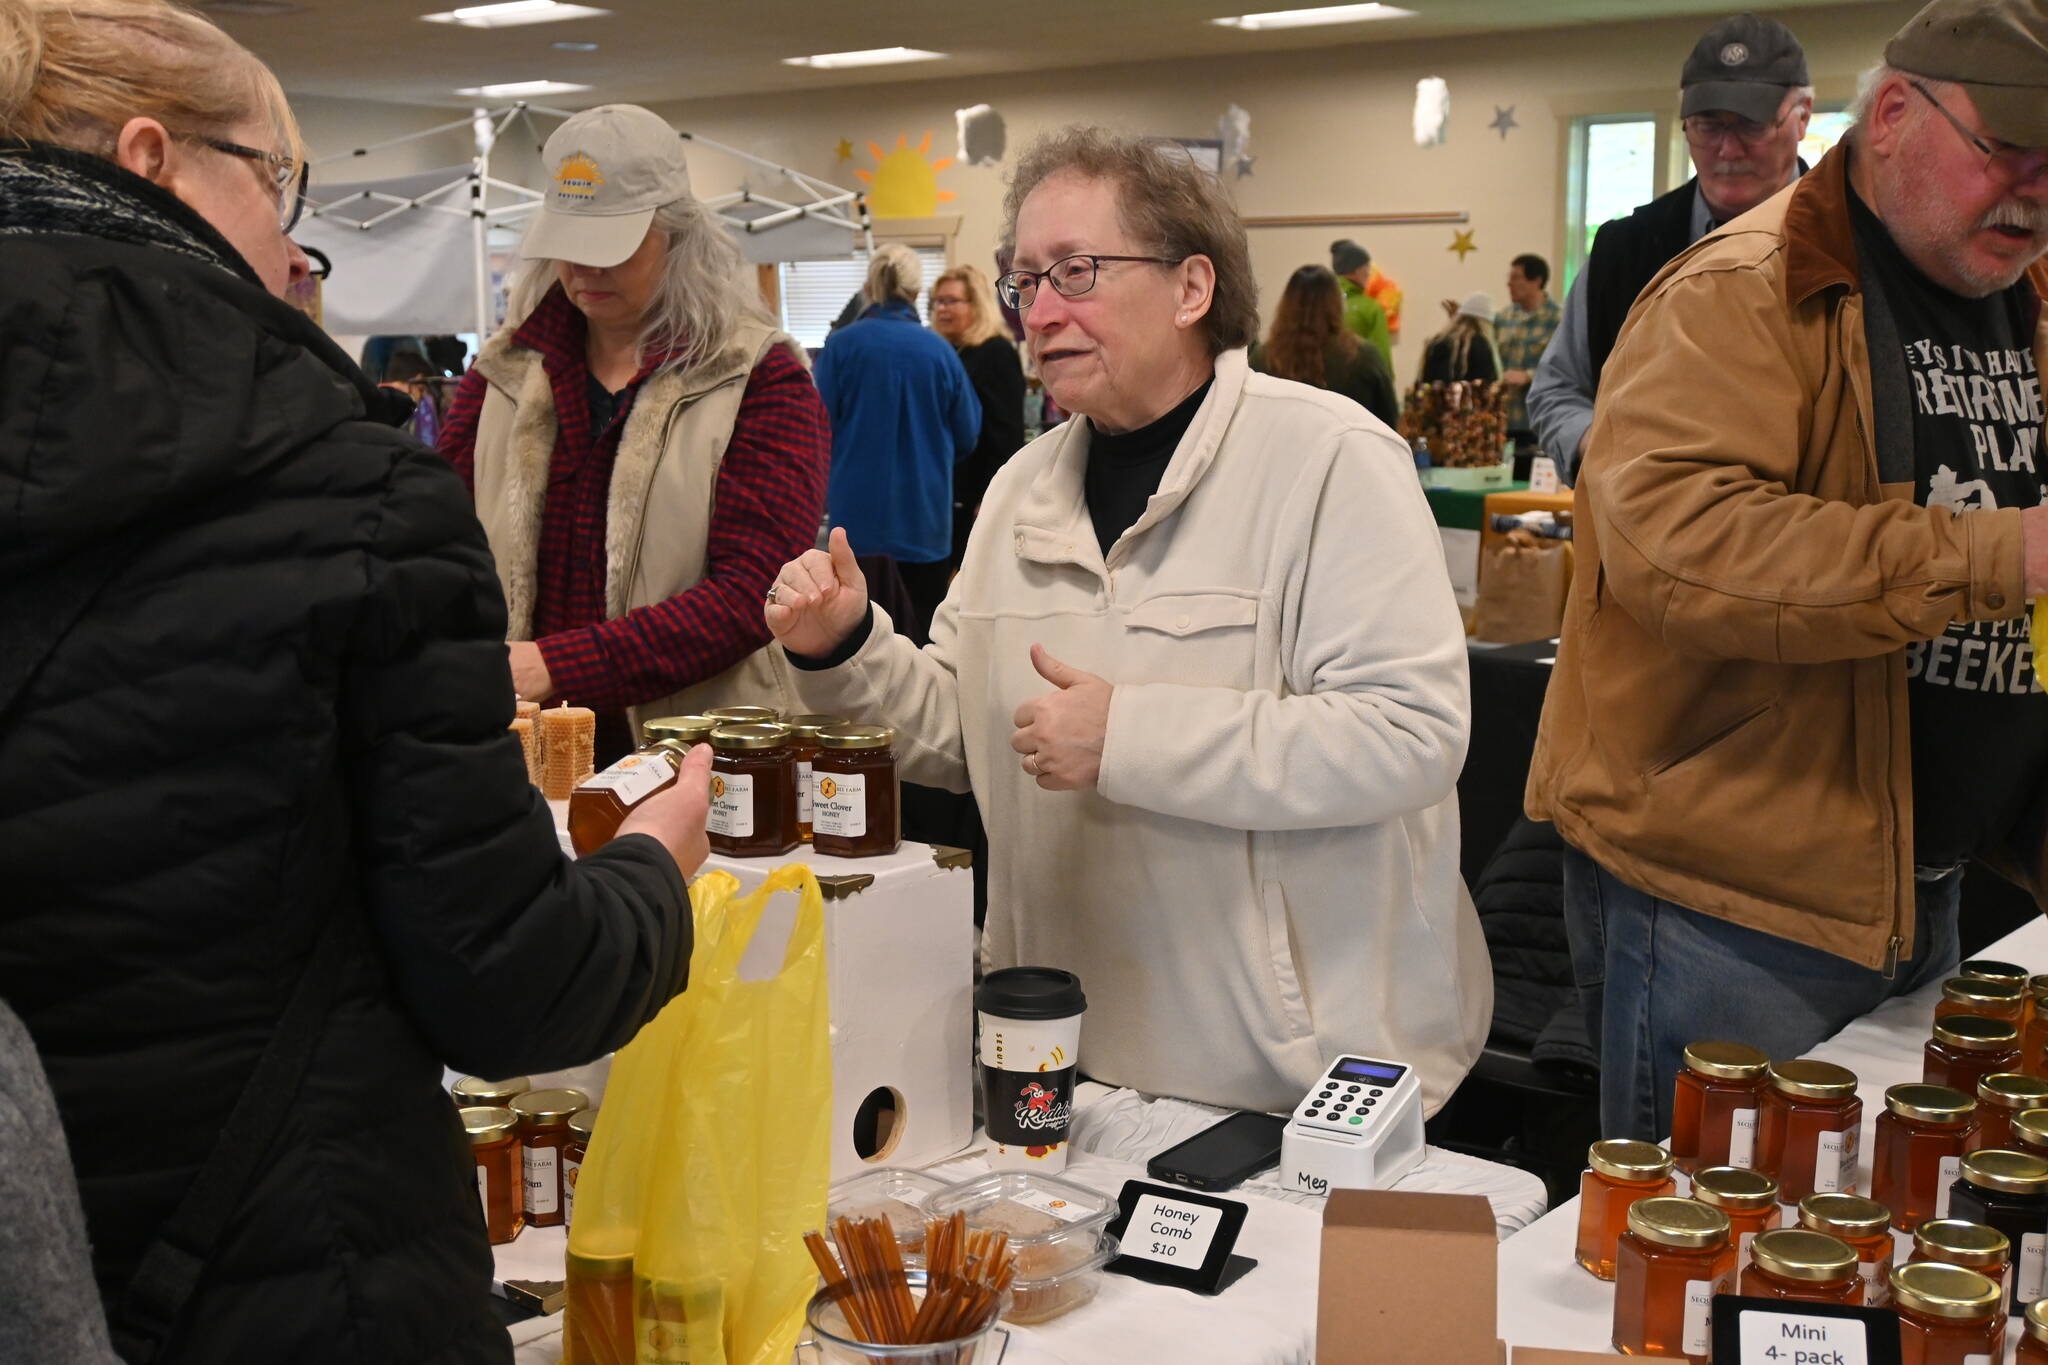 Sequim Gazette photo by Michael Dashiell / Meg and Buddy Depew chat with customers at the Sunshine Market inside the Guy Cole Event Center on March 4.